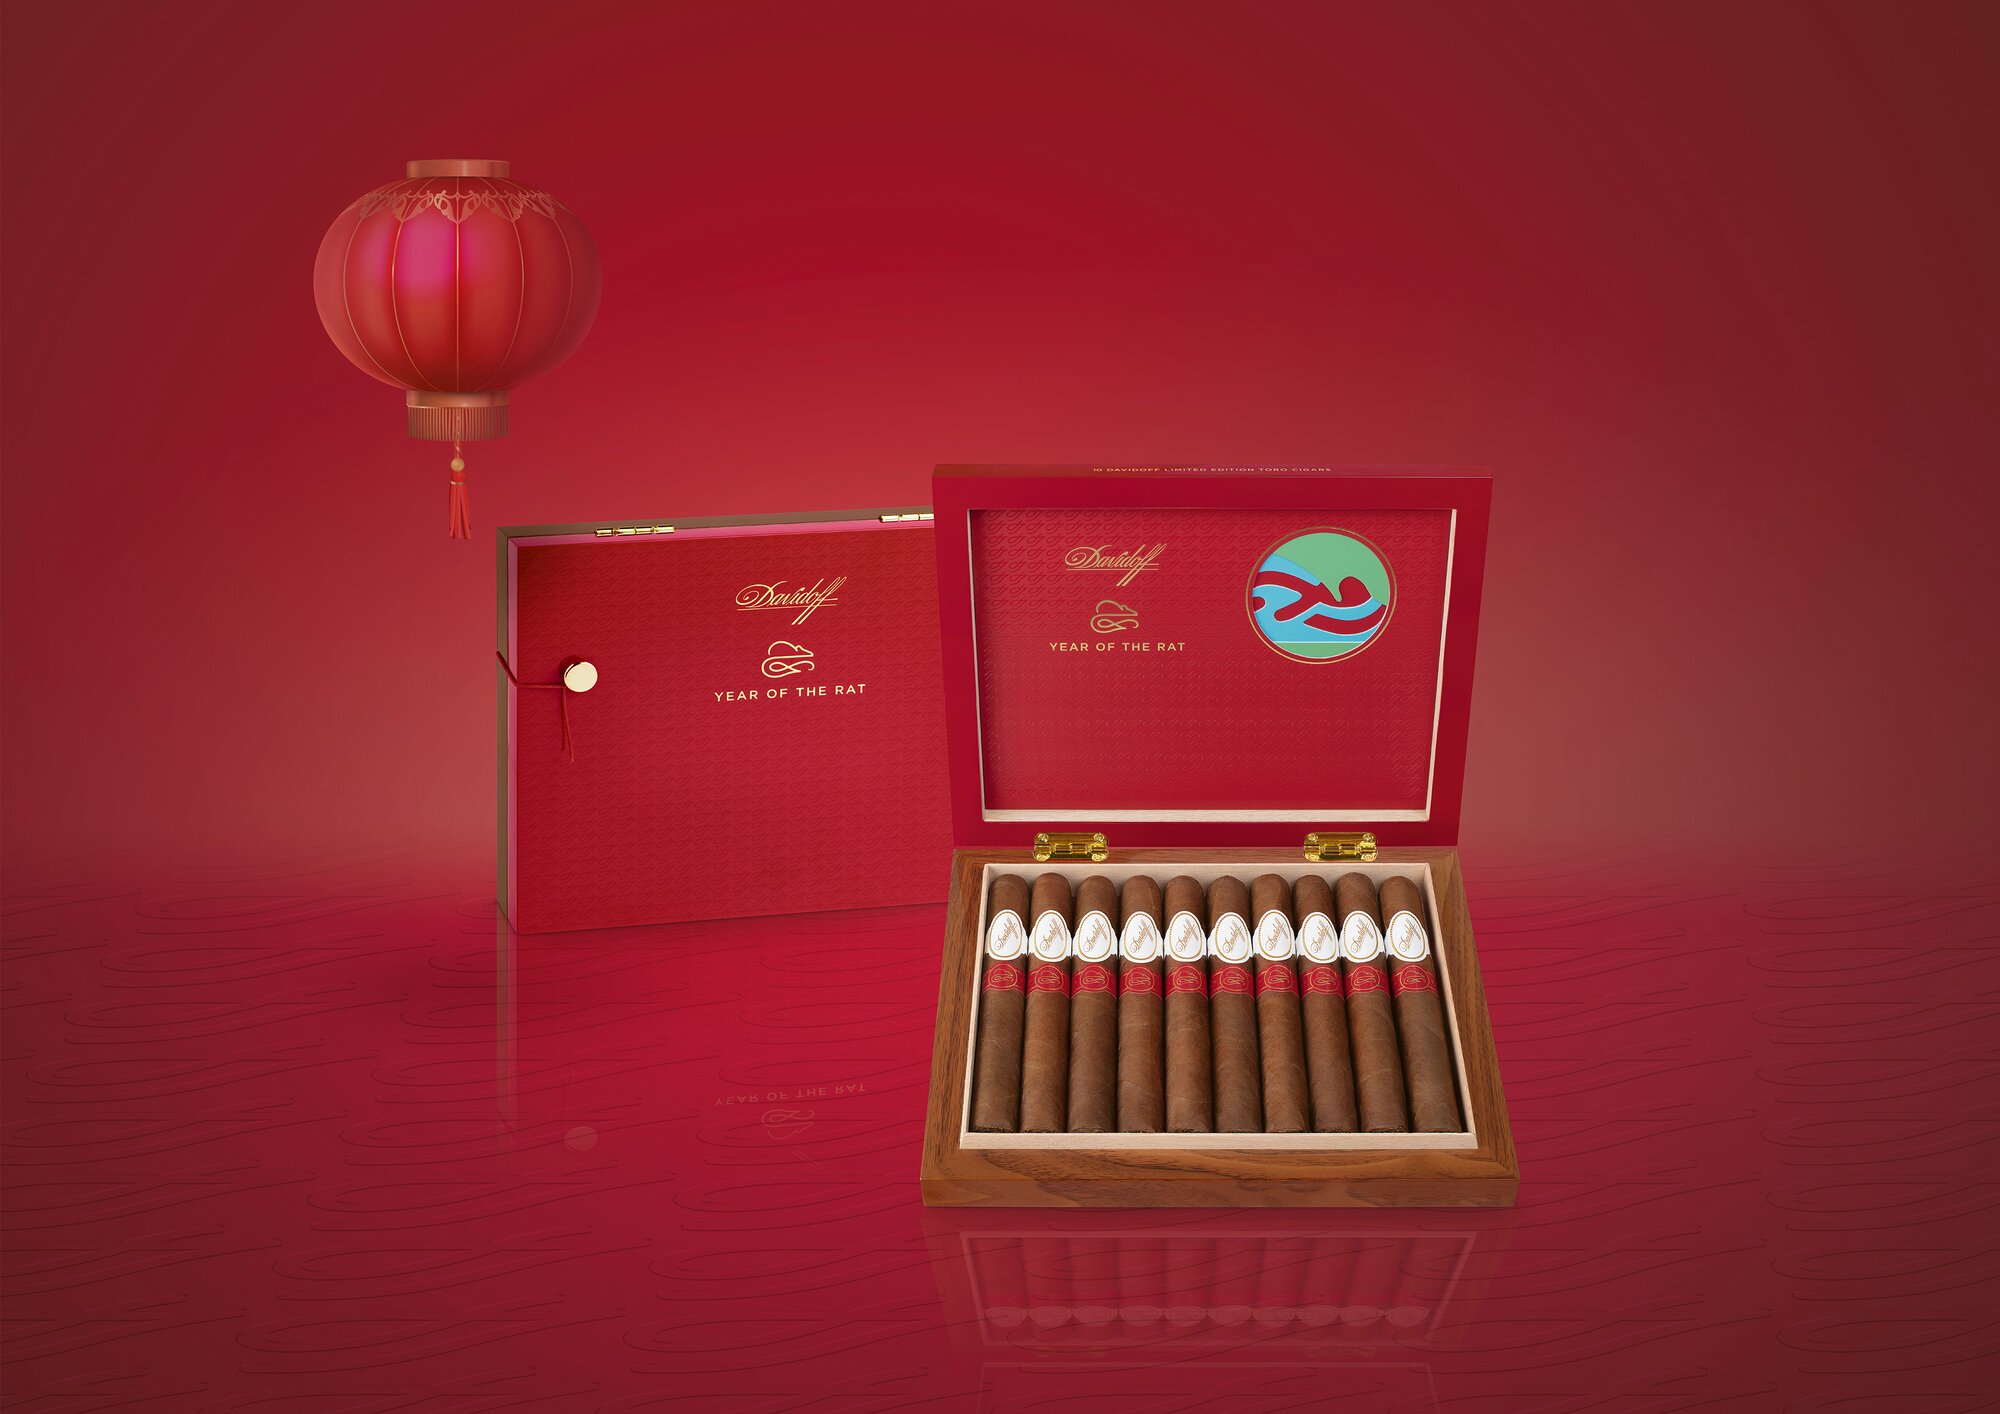 The Davidoff Year of the Rat Limited Edition 2020 cigars are displayed in their opened box. A view of the front of the red packaging, opened to reveal the cigars within.